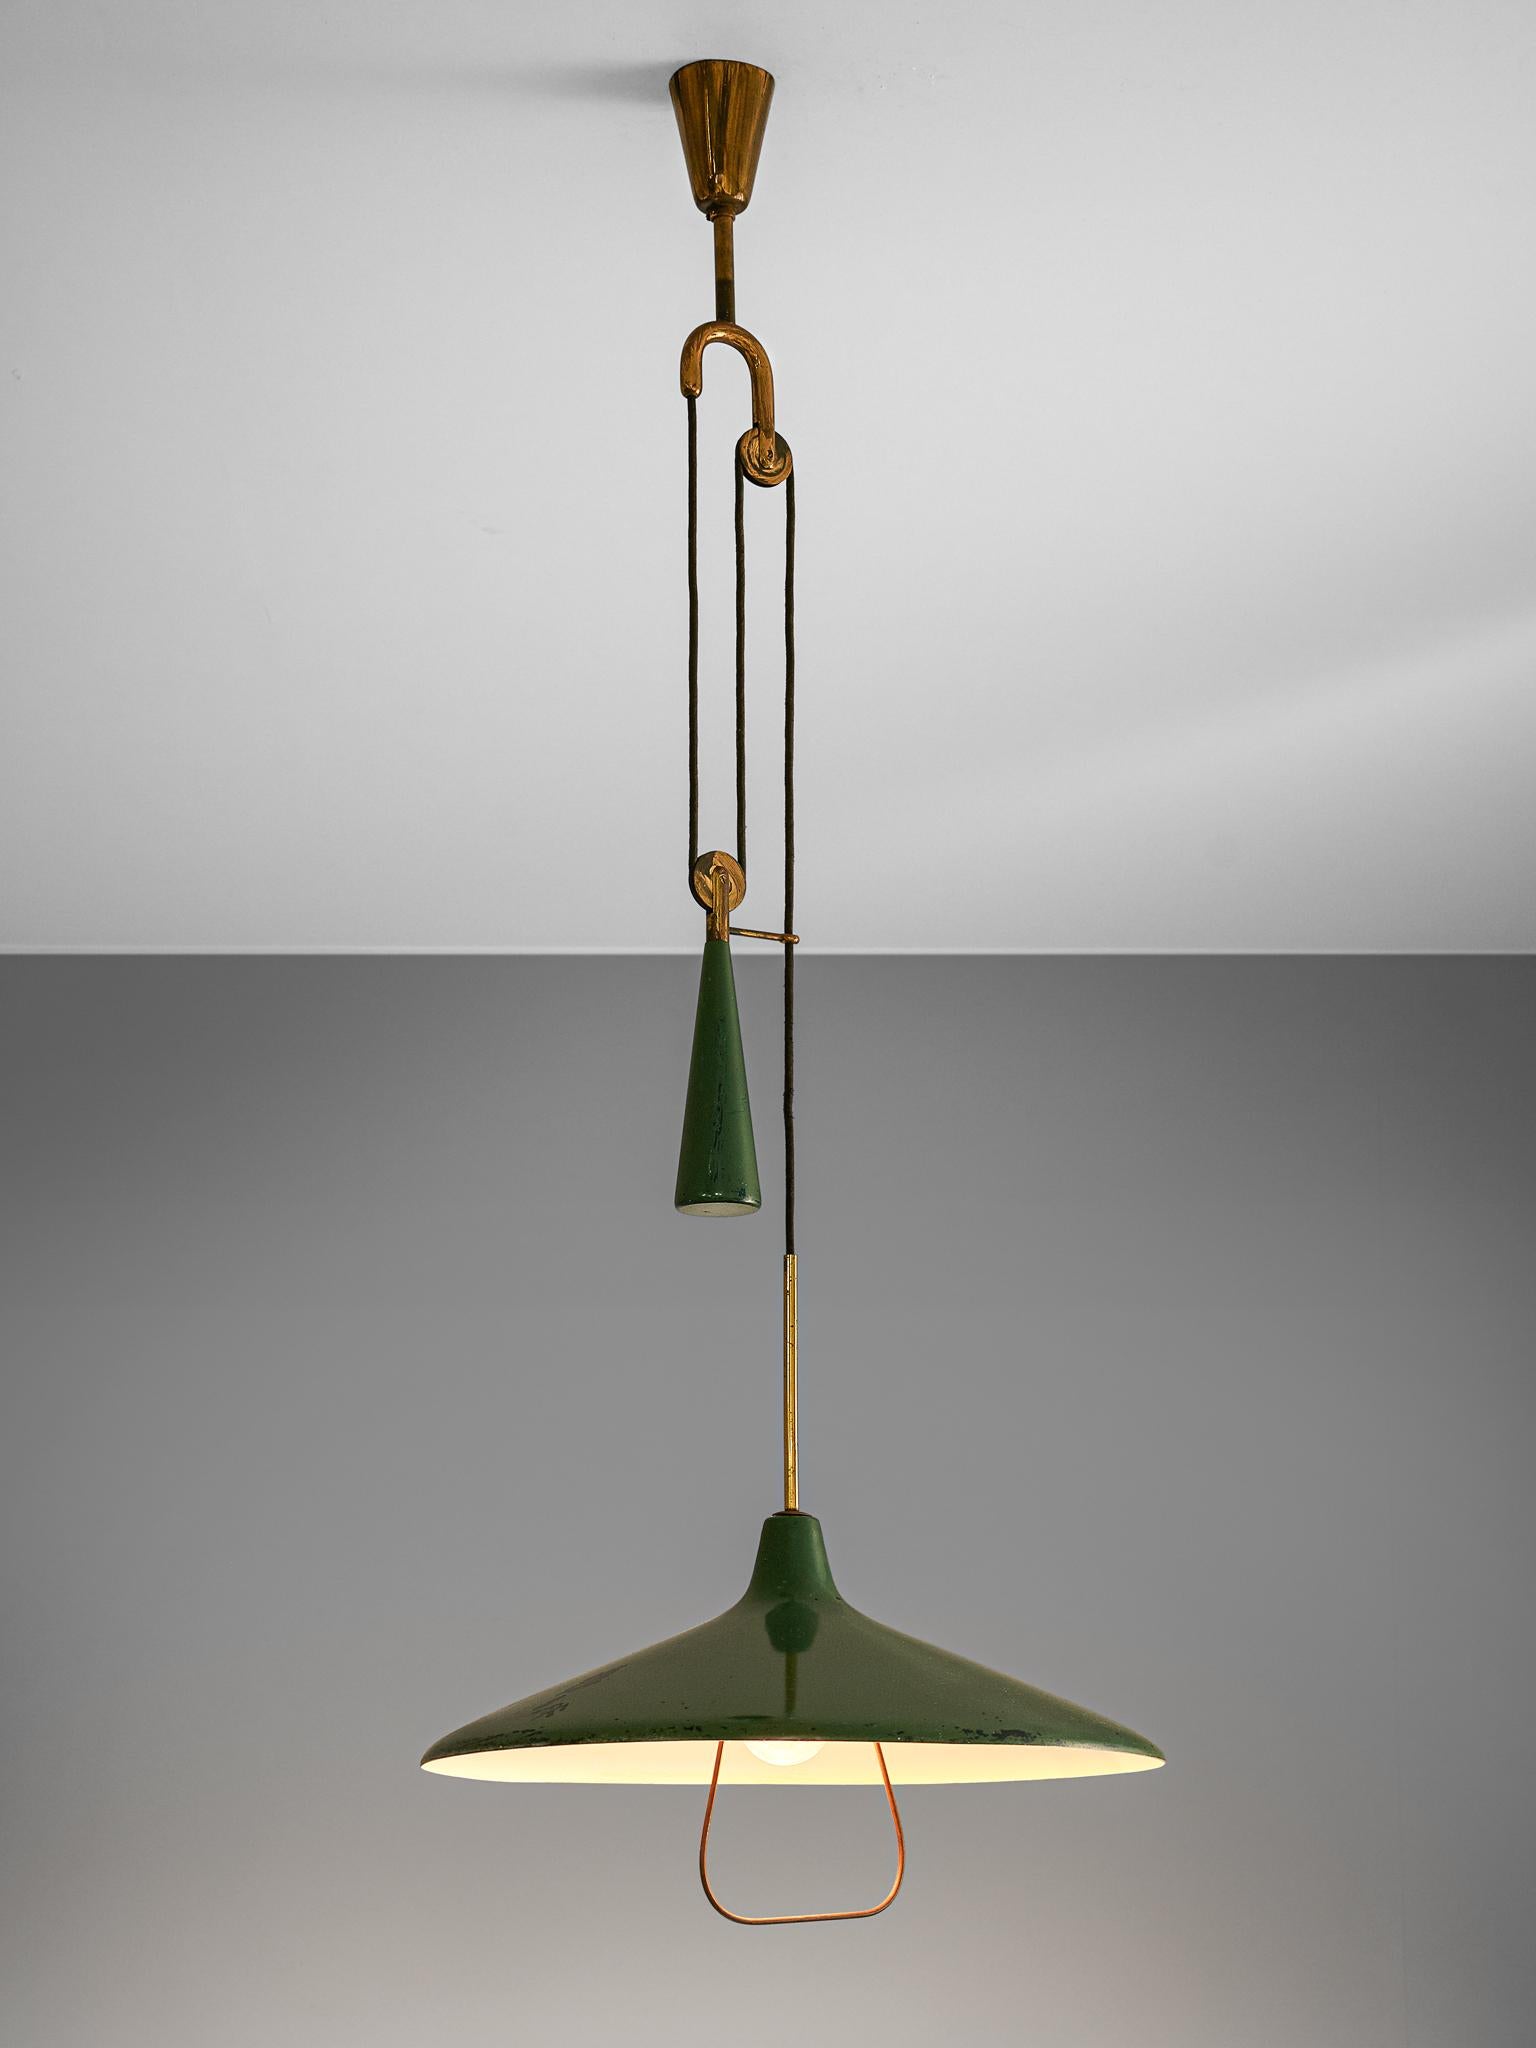 Angelo Lelii for Arredoluce, ceiling lamp model 12126, metal and brass, Italy, 1947.

A pendant by Angelo Lelii containing an inventive latch system with a counterweight. The system makes it possible hang the pendant on any desirable height. The